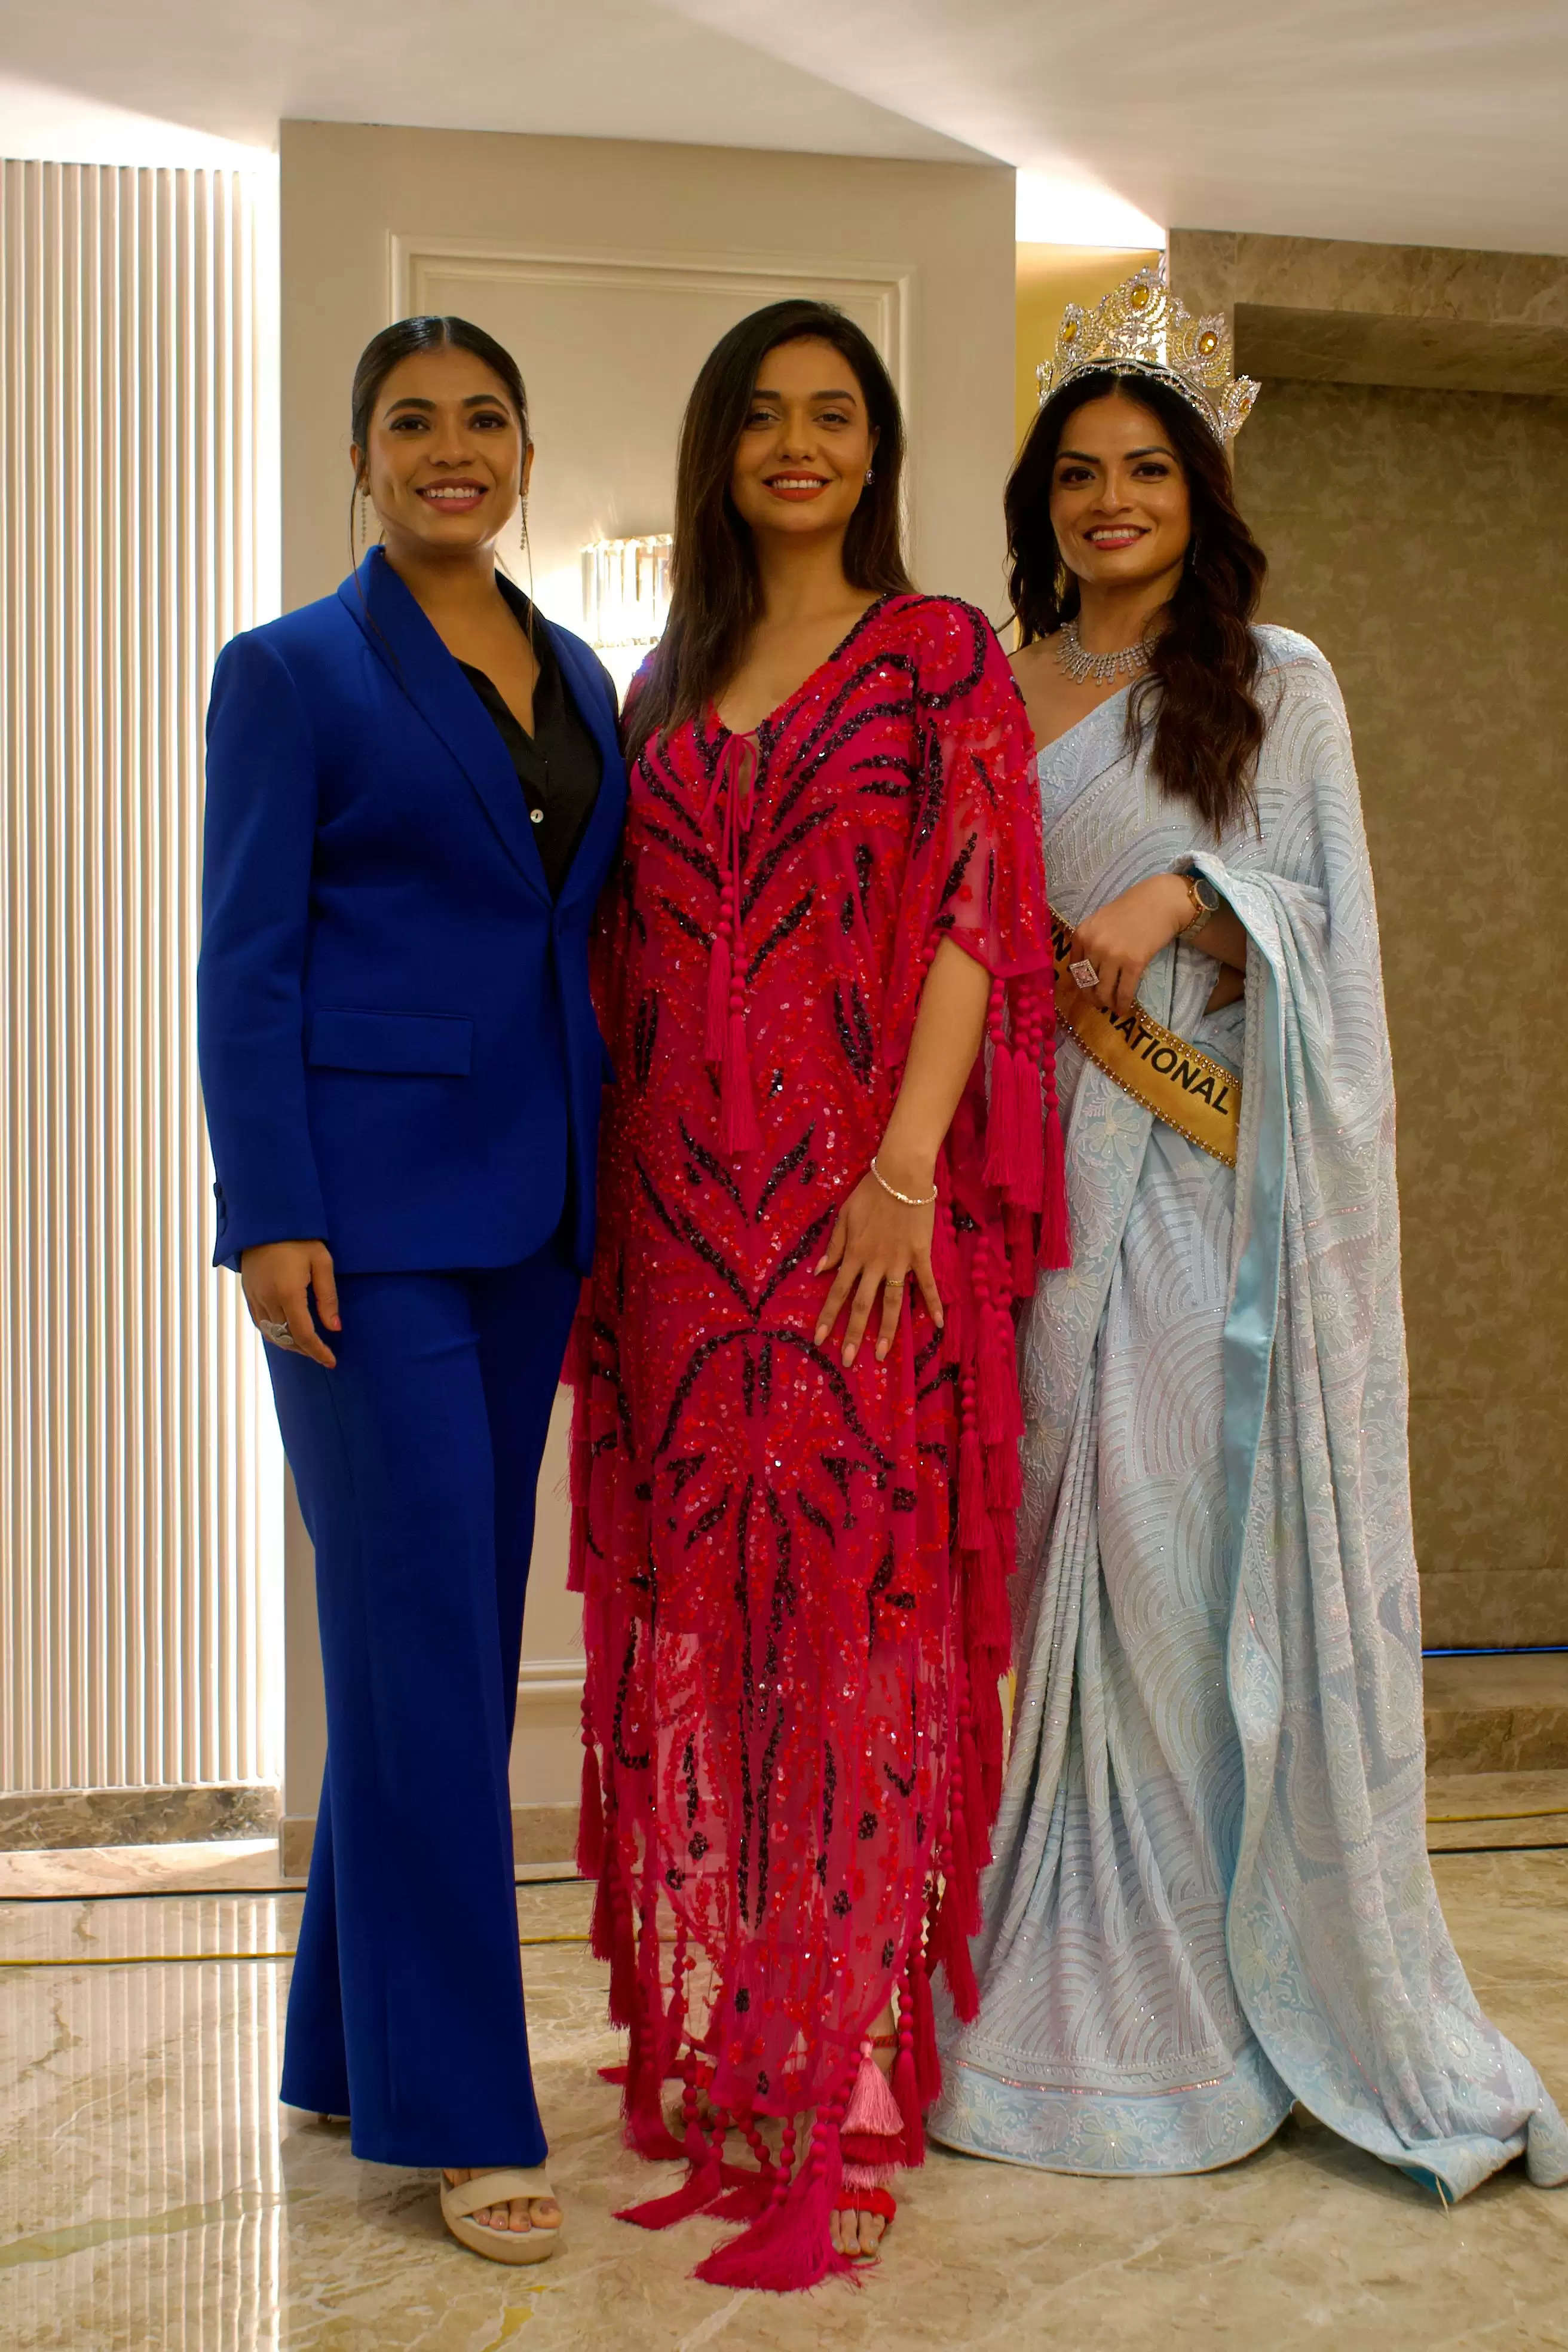 Audicious Mrs India Season 1 Unveiled by Divya Agarwal and Audrey Dsilva, Offering Opportunities for Married Women to Pursue Dreams